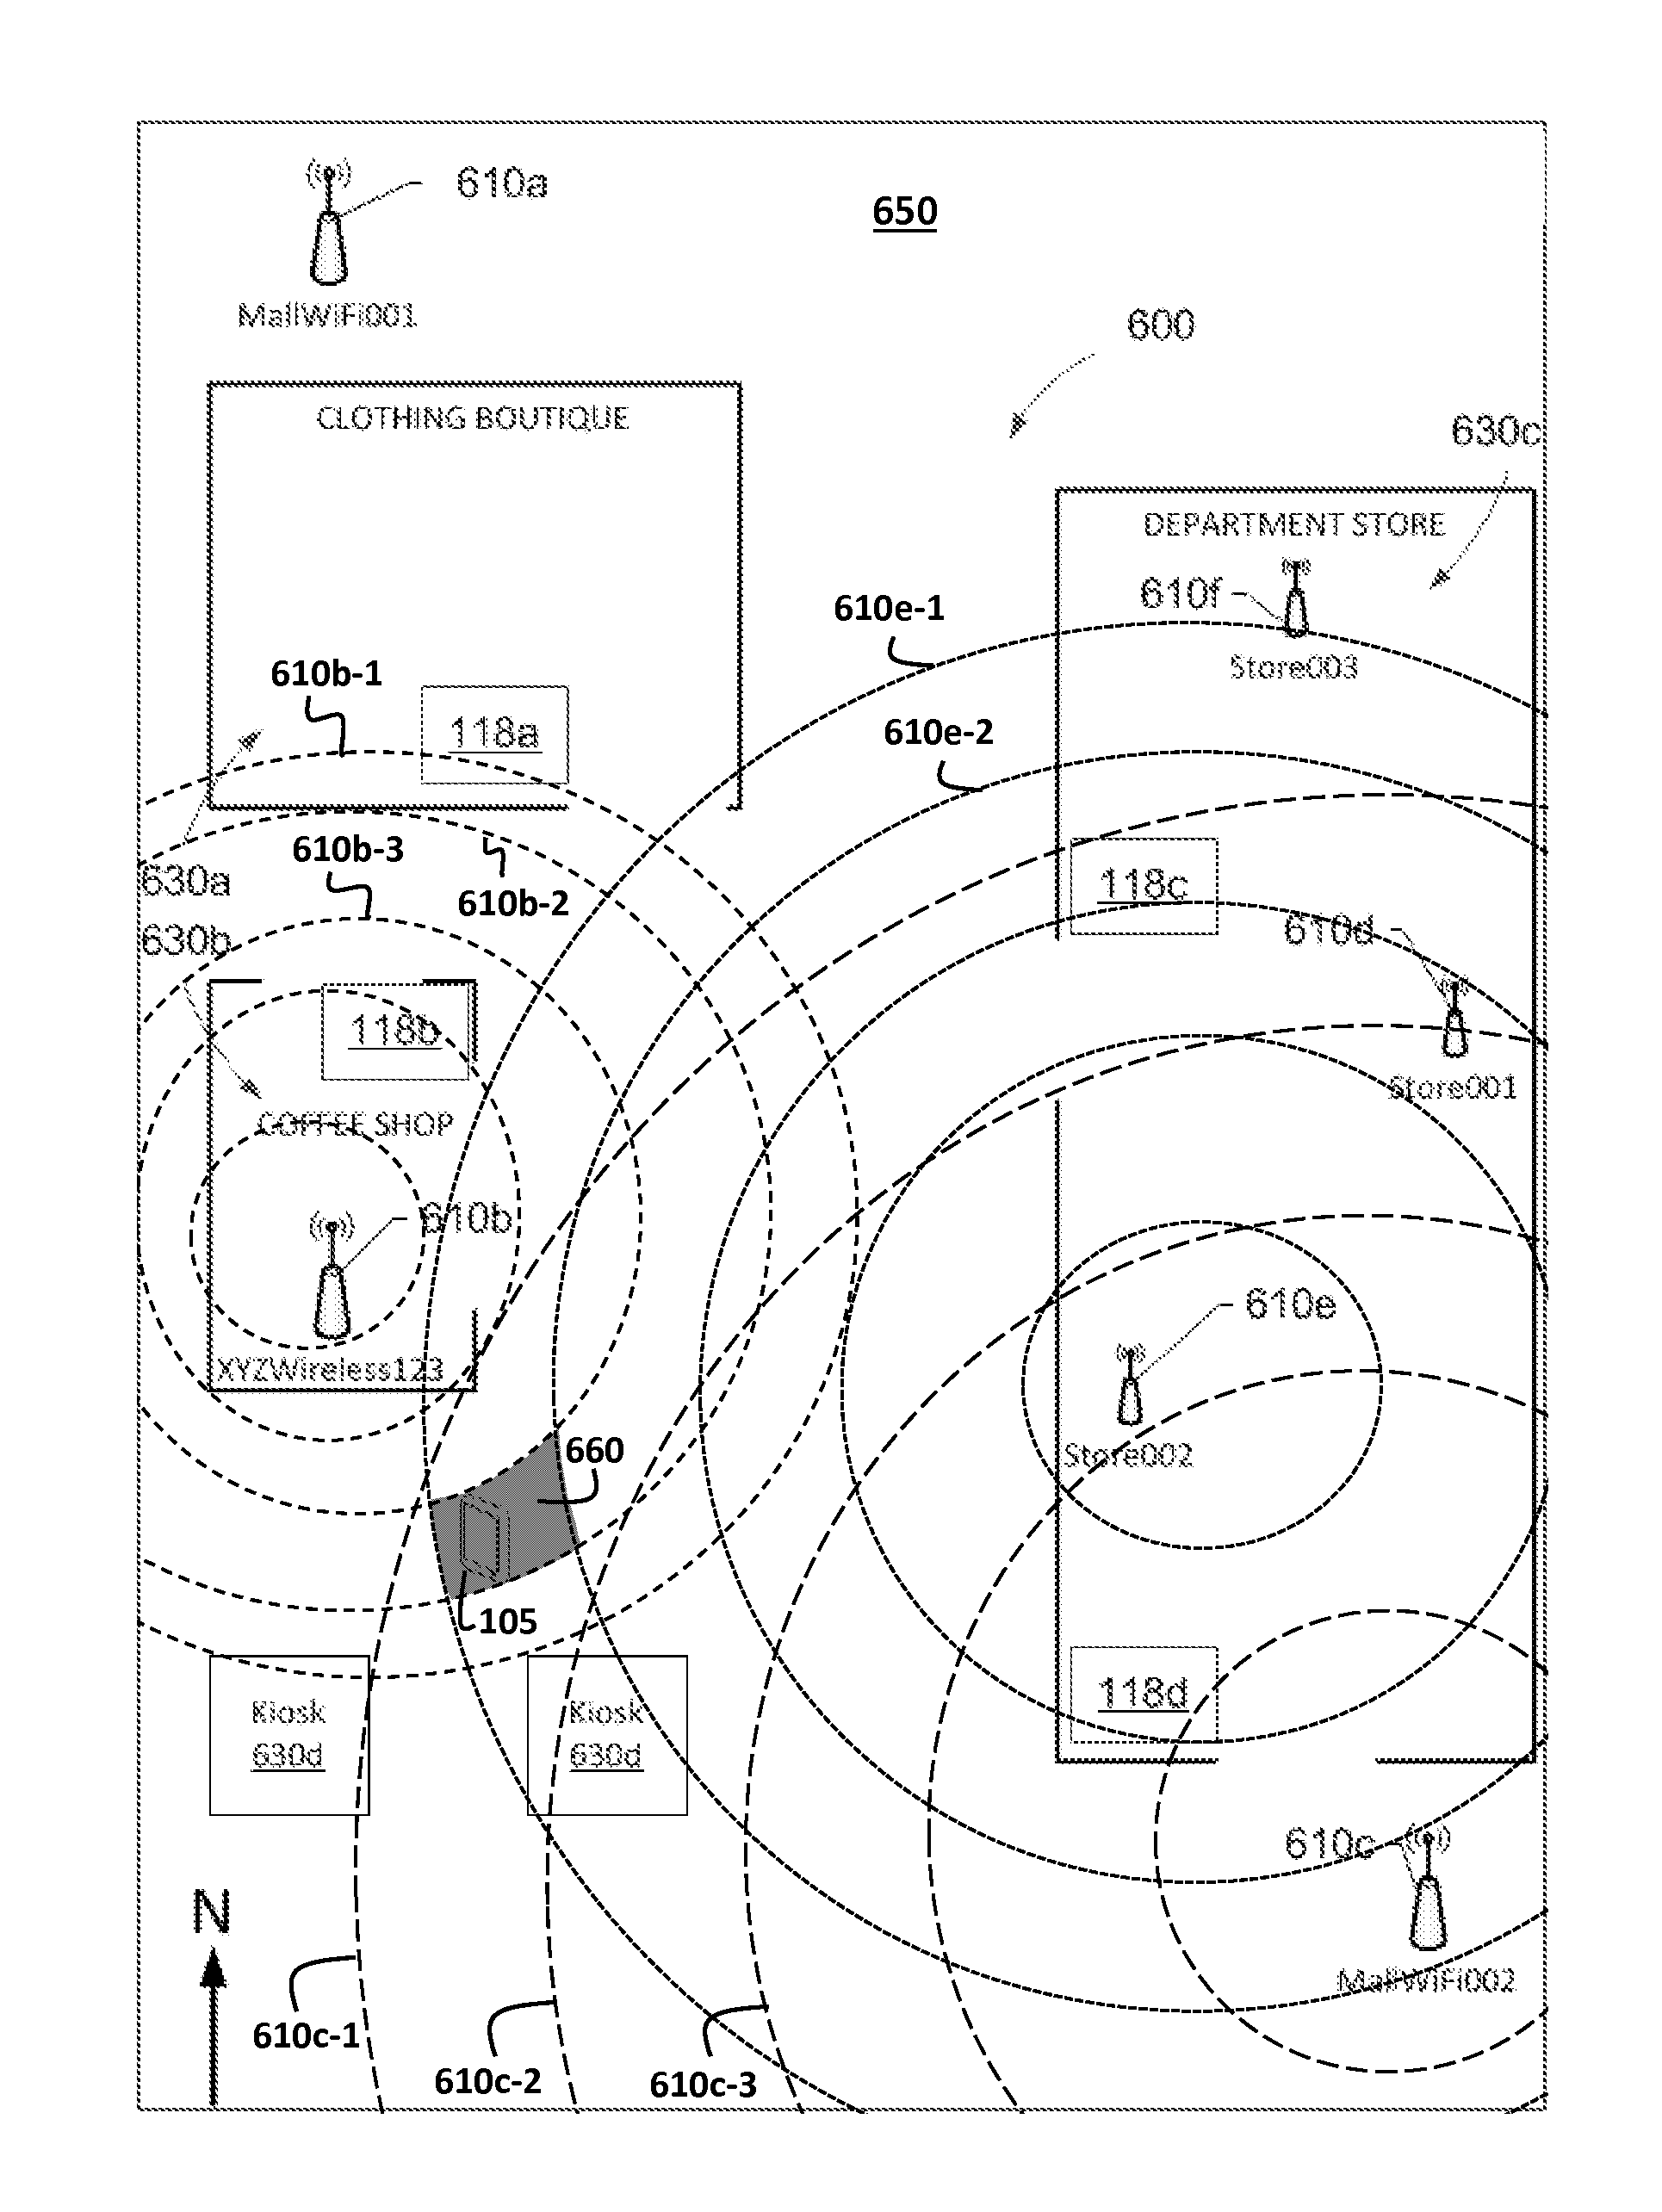 Systems and methods for determining device location using wireless data and other geographical location data